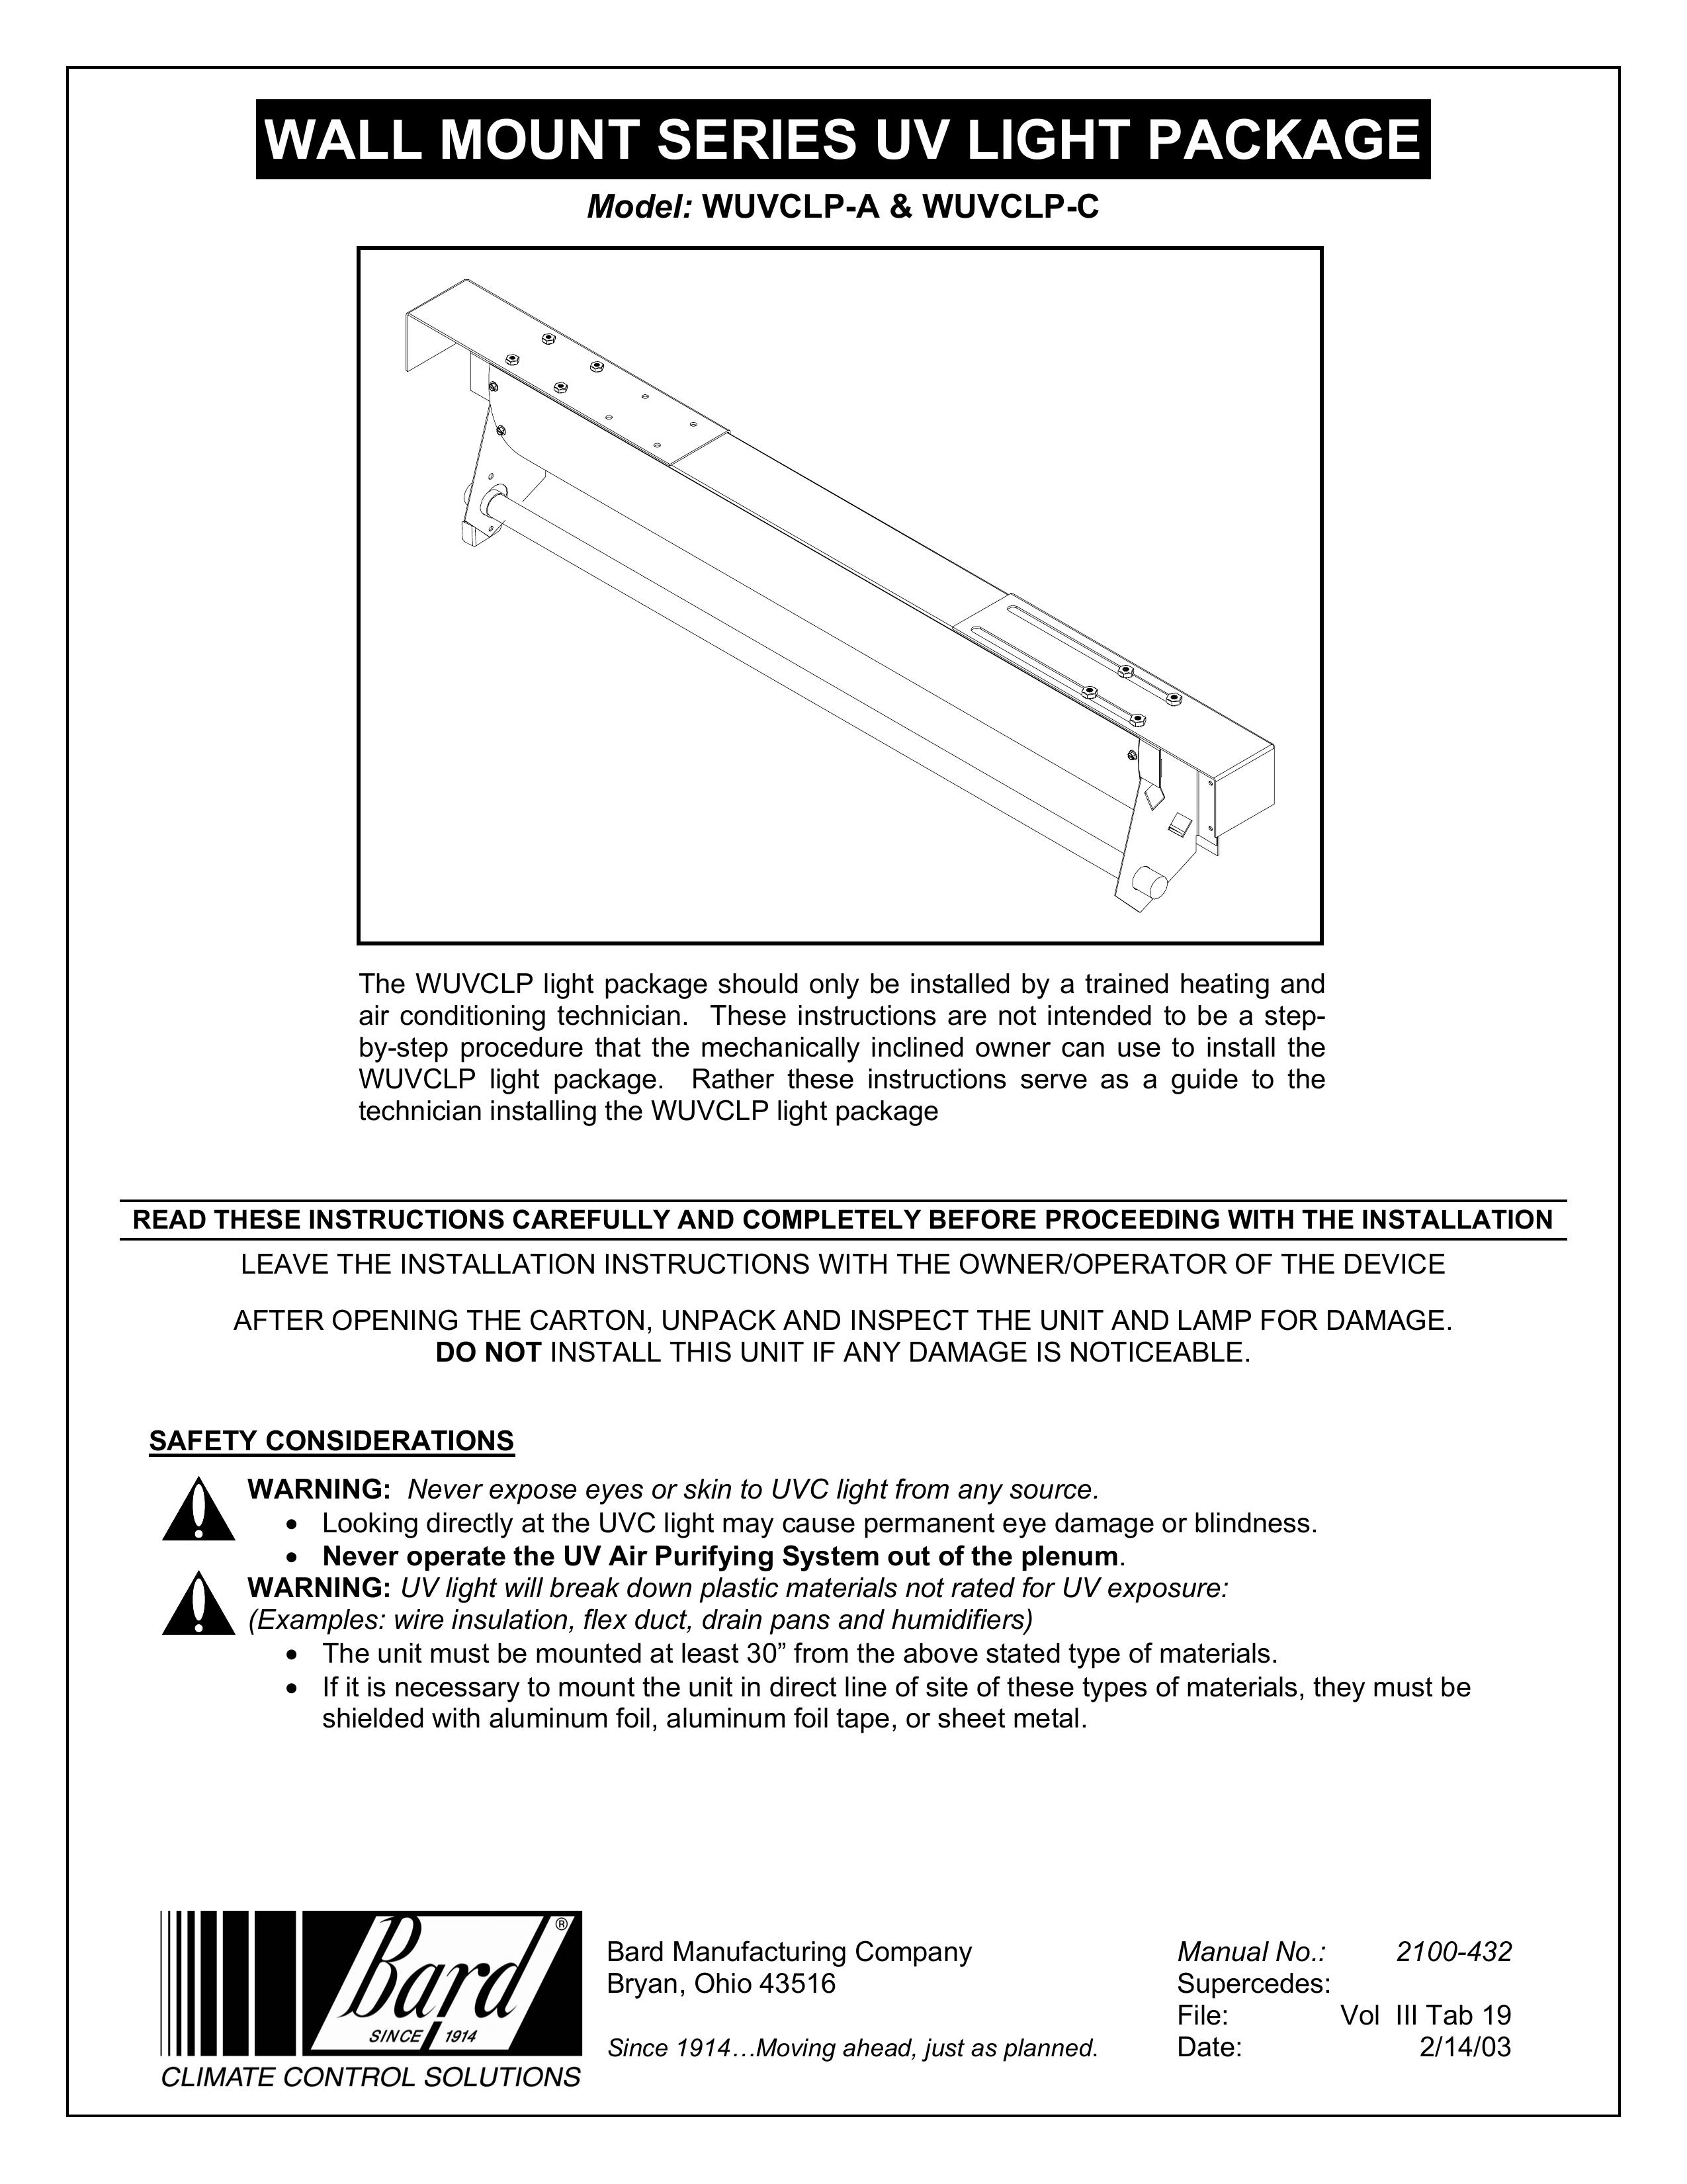 Bard WUVCLP-C Light Therapy Device User Manual